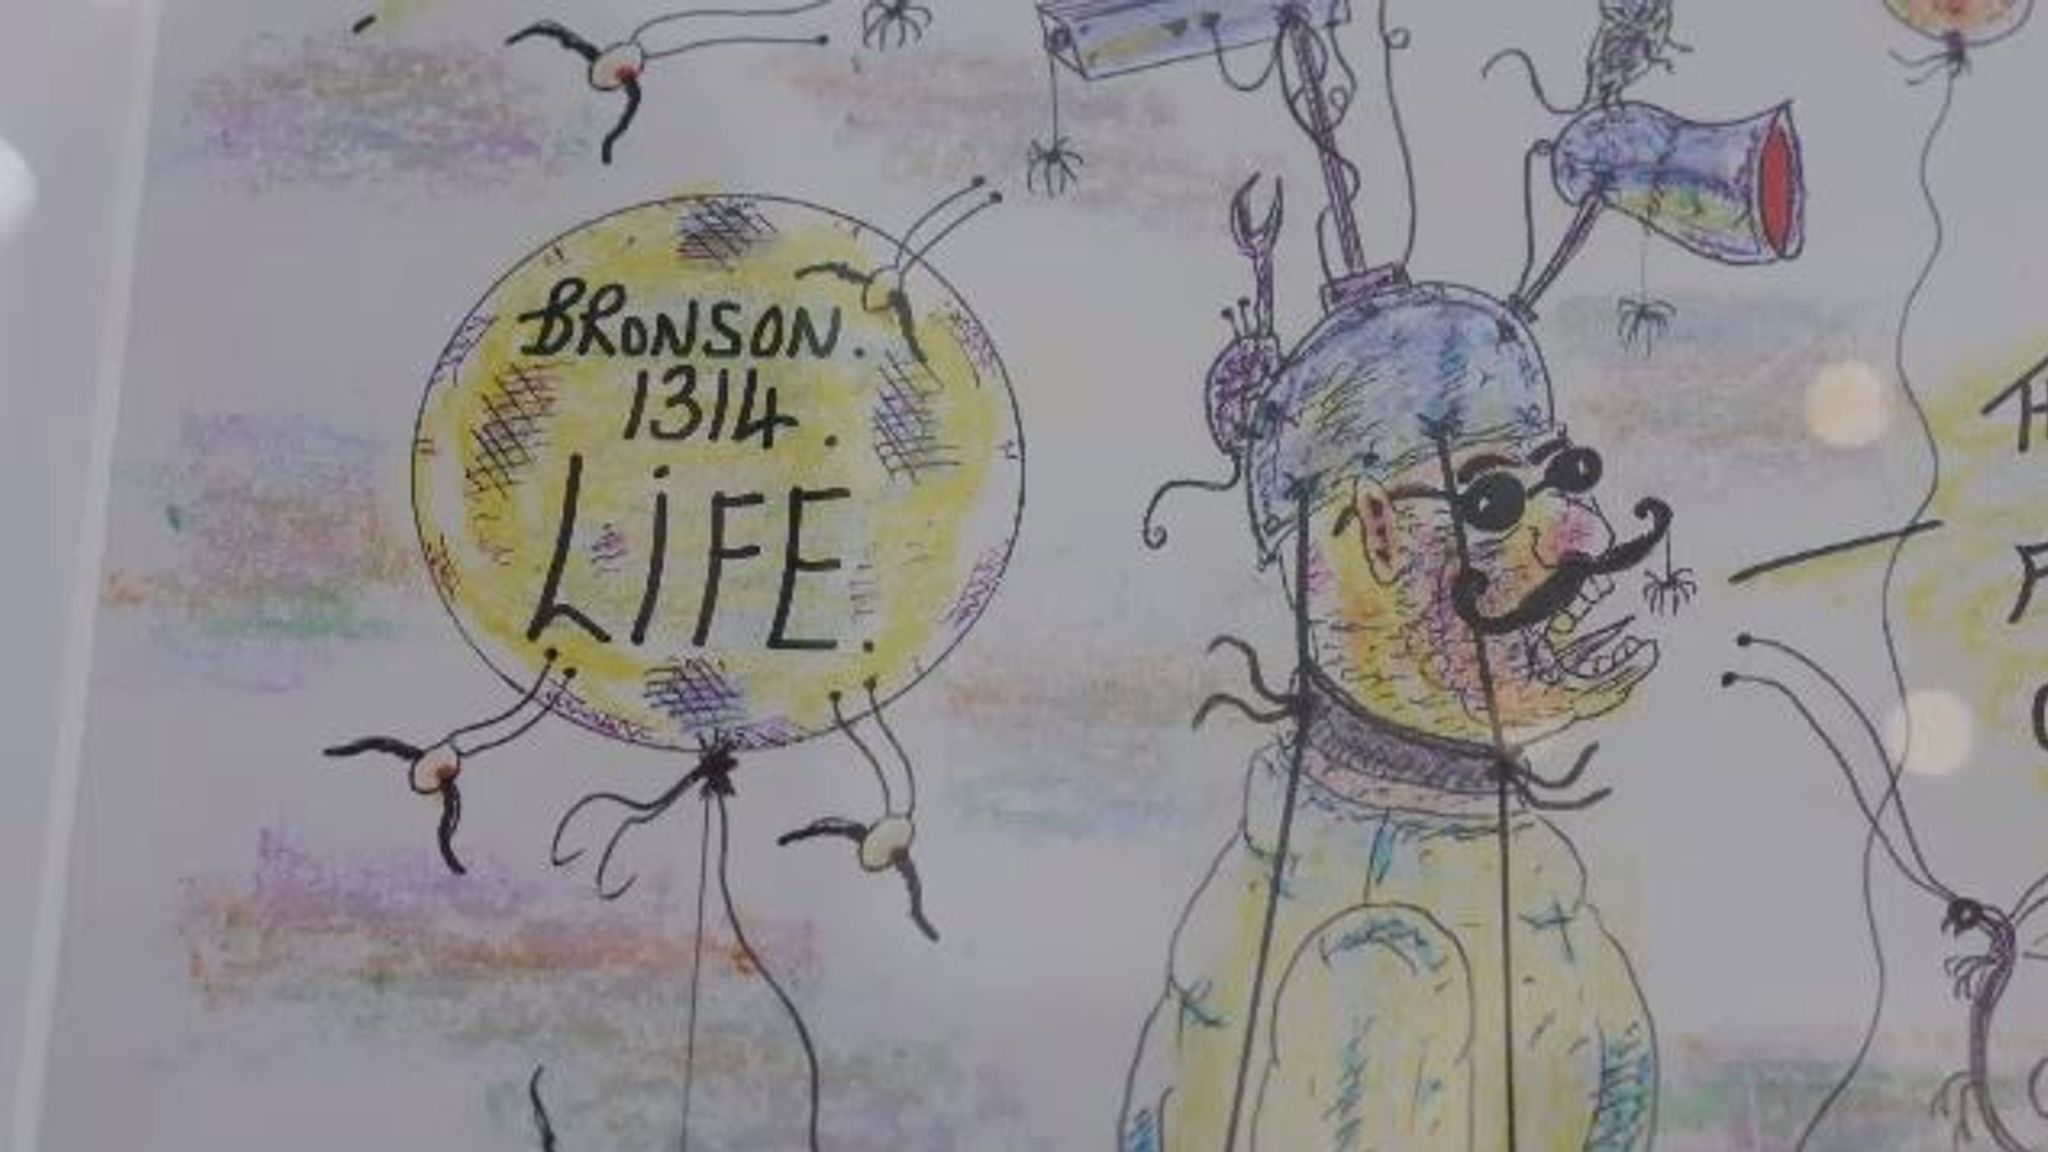 Charles Bronson Britain's most notorious prisoner launches art